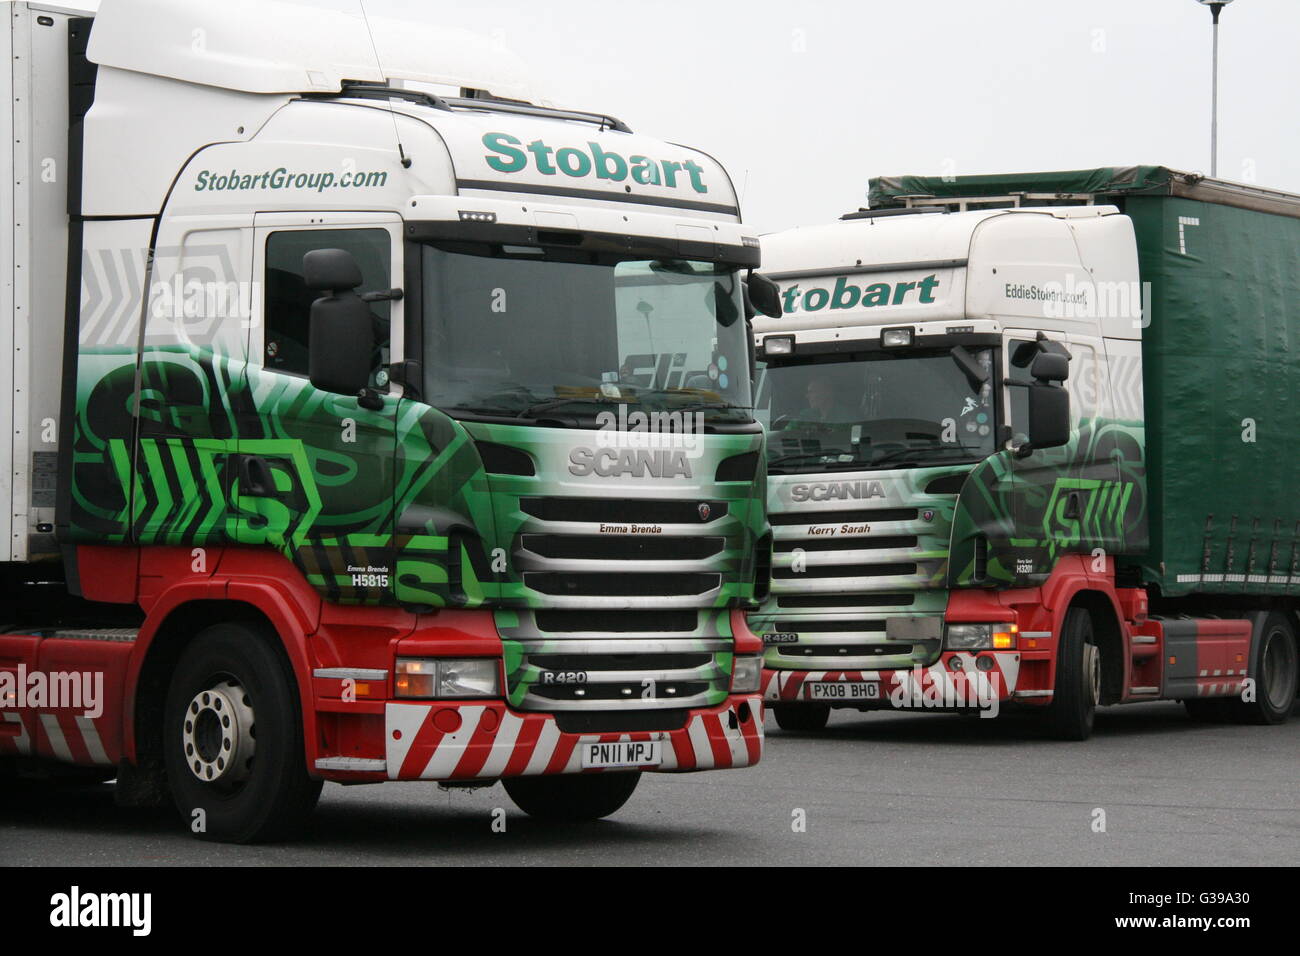 A PAIR OF EDDIE STOBART SCANIA TRUCKS AT A MOTORWAY SERVICE AREA Stock Photo